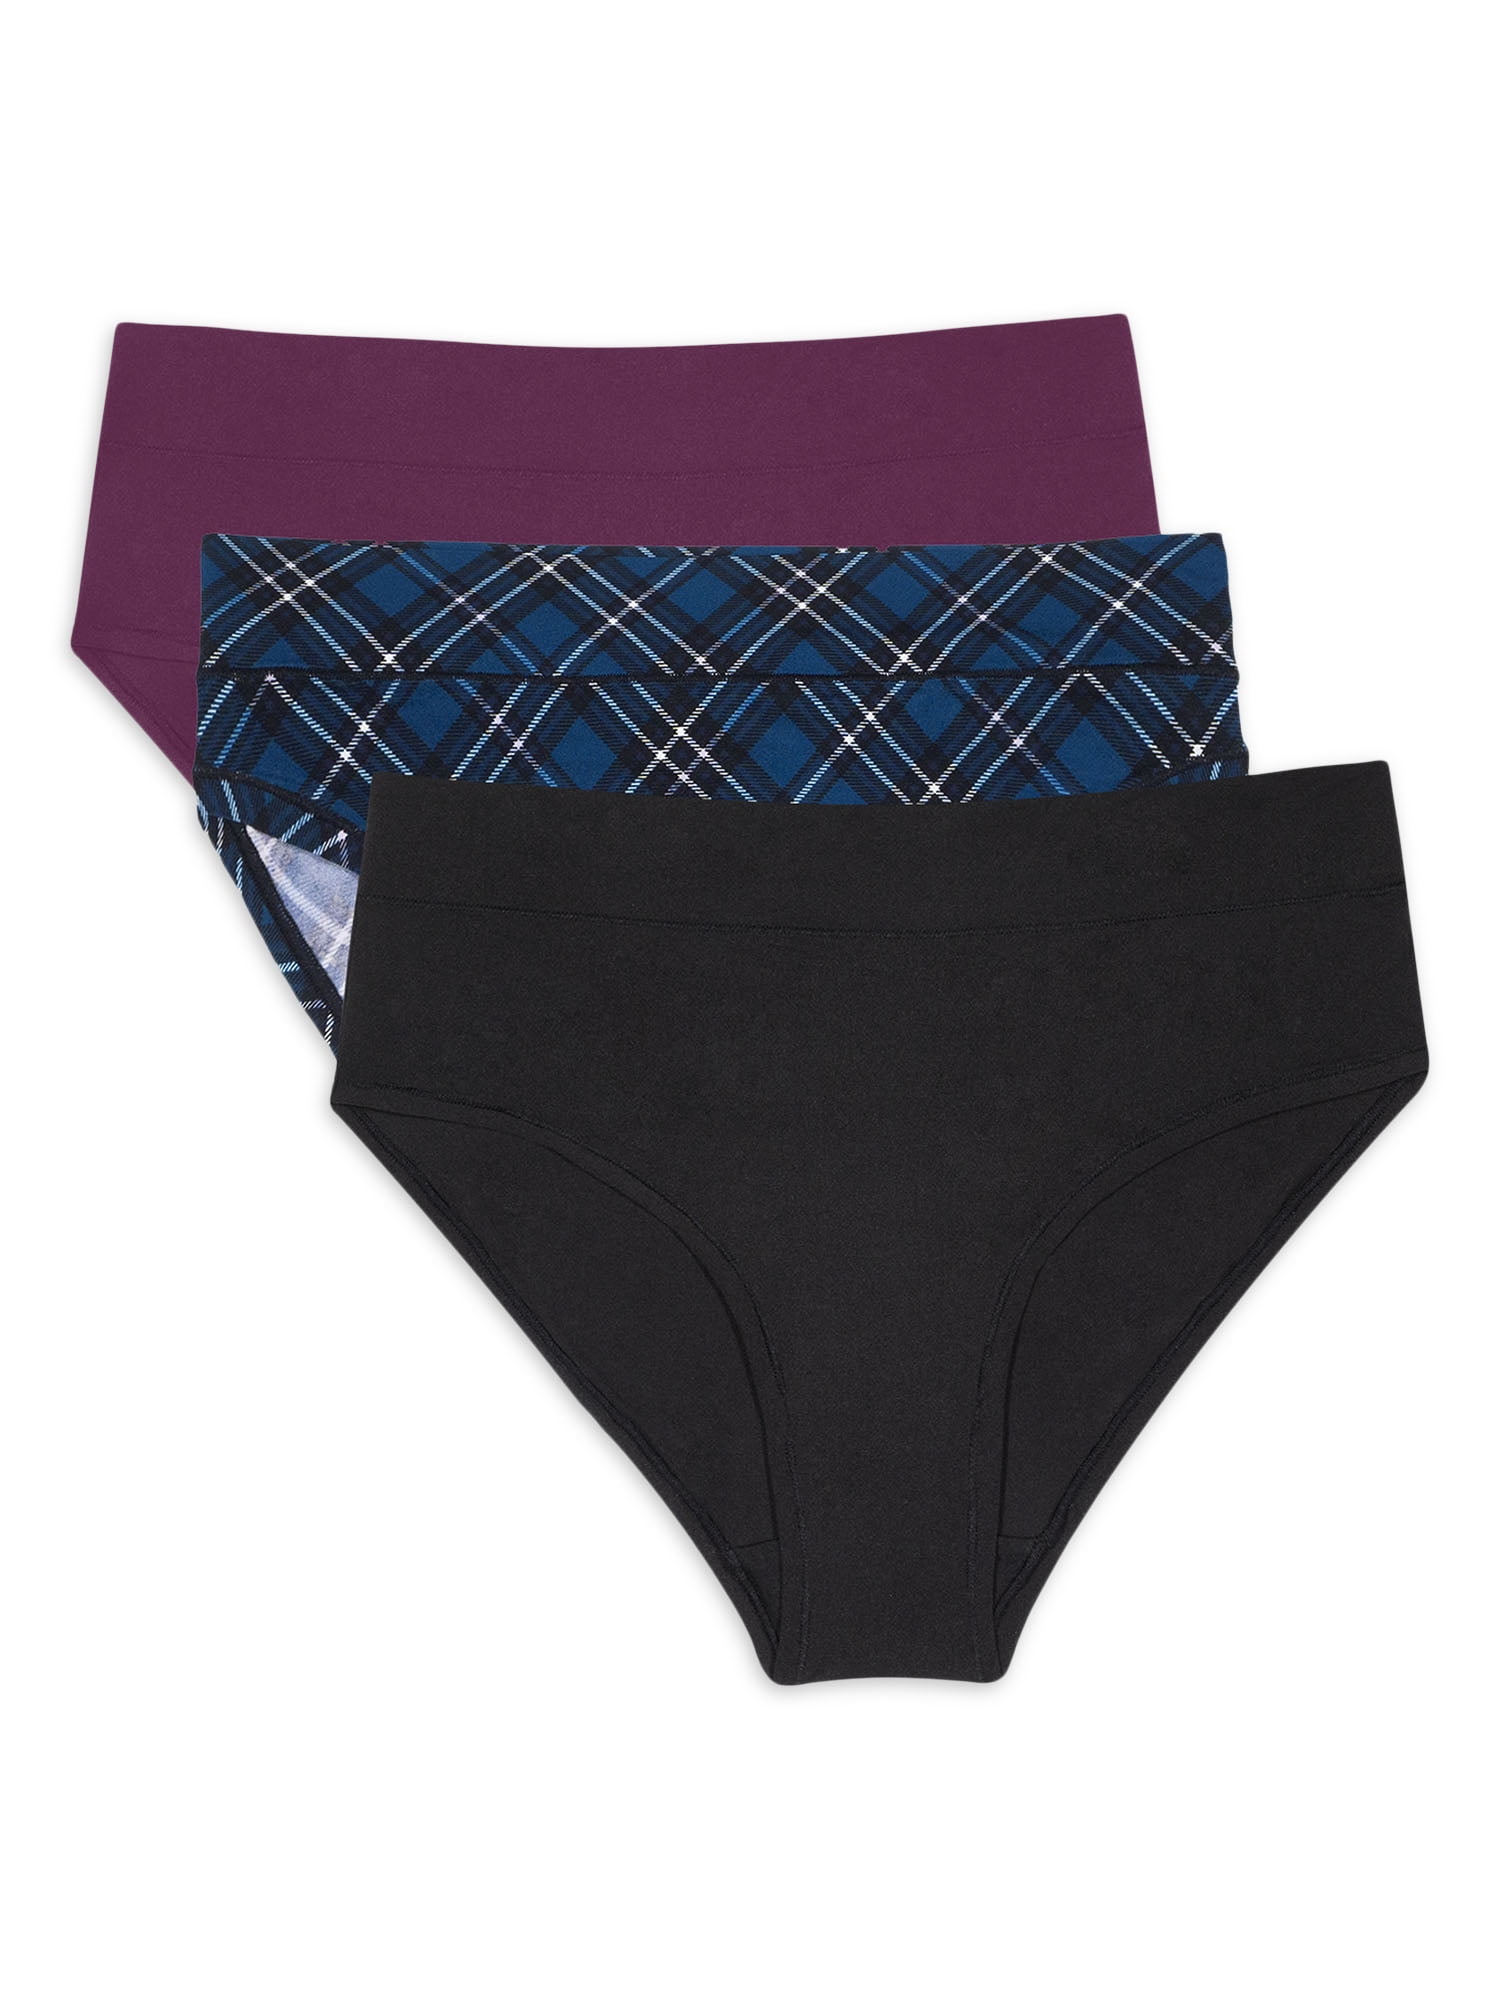 Secret Treasures Solid Plaid Hipster Stretchy Panty (Women's) 3 Pack